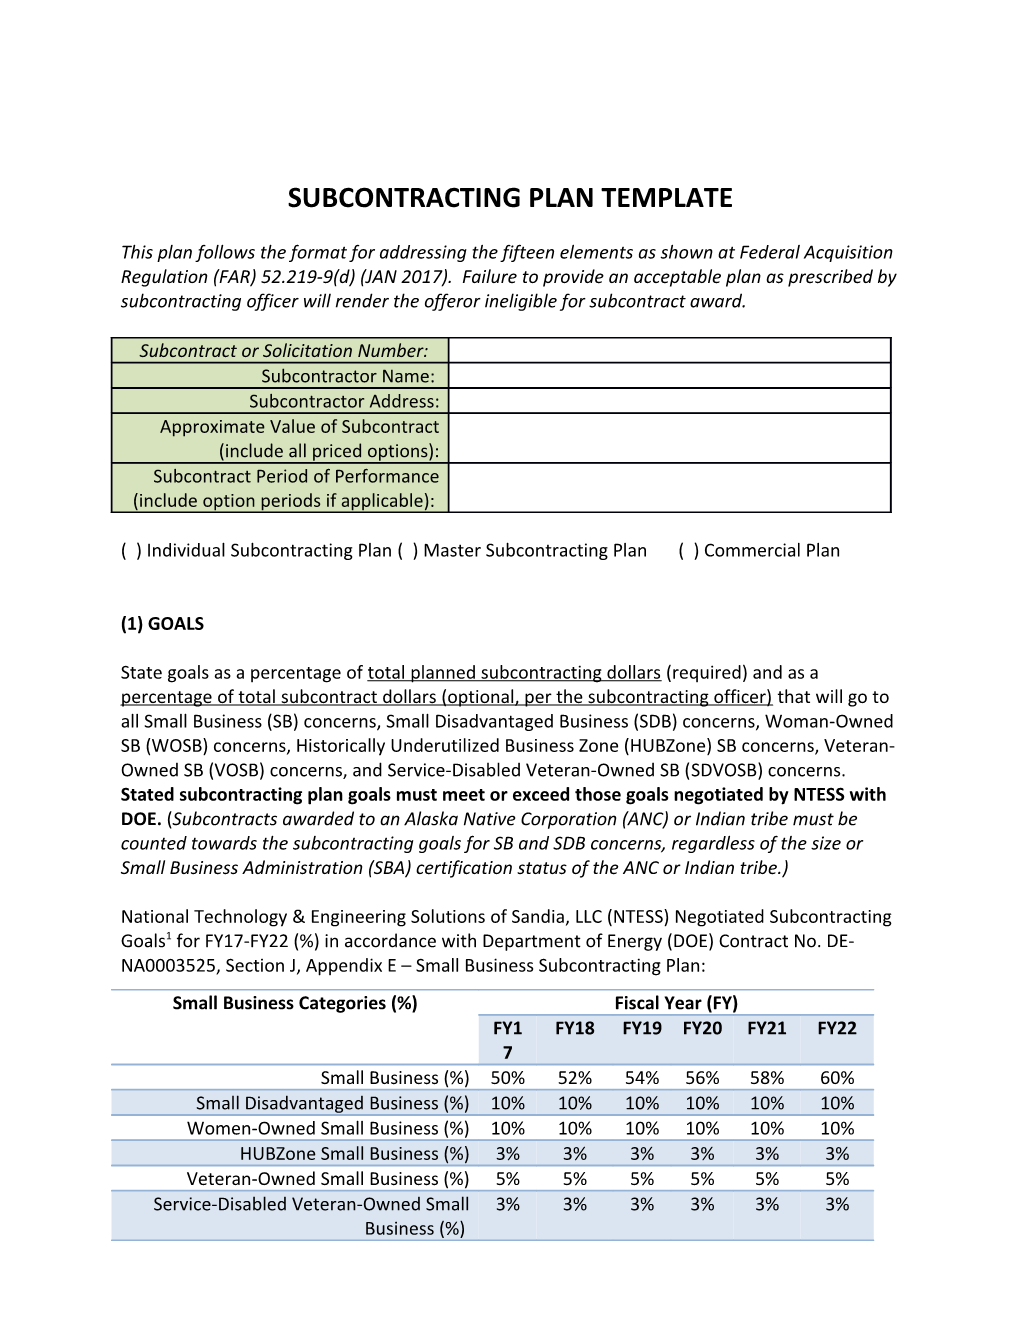 ASI Template: Subcontracting Plan